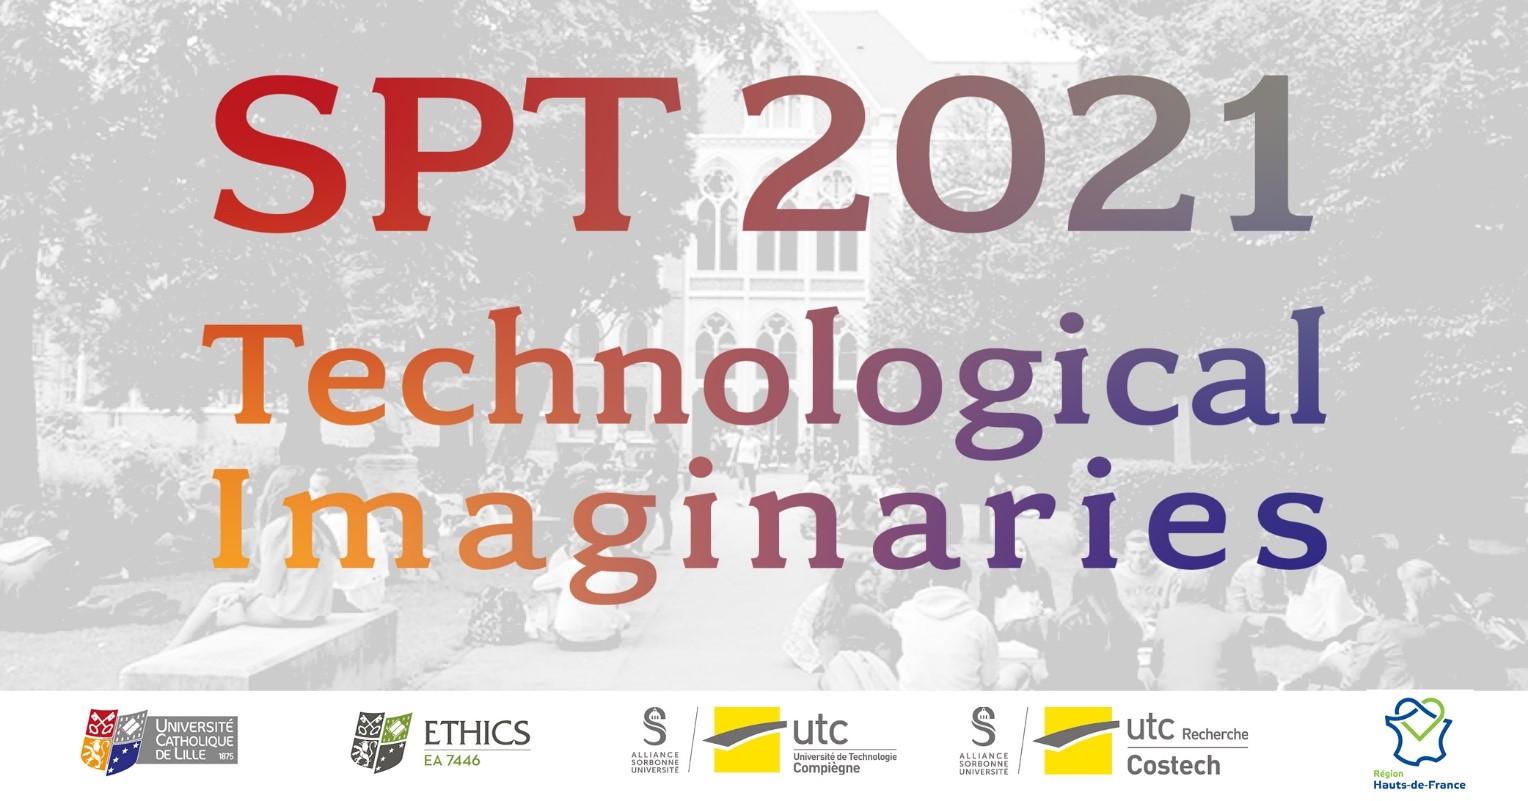 Society for Philosophy and Technology (SPT)